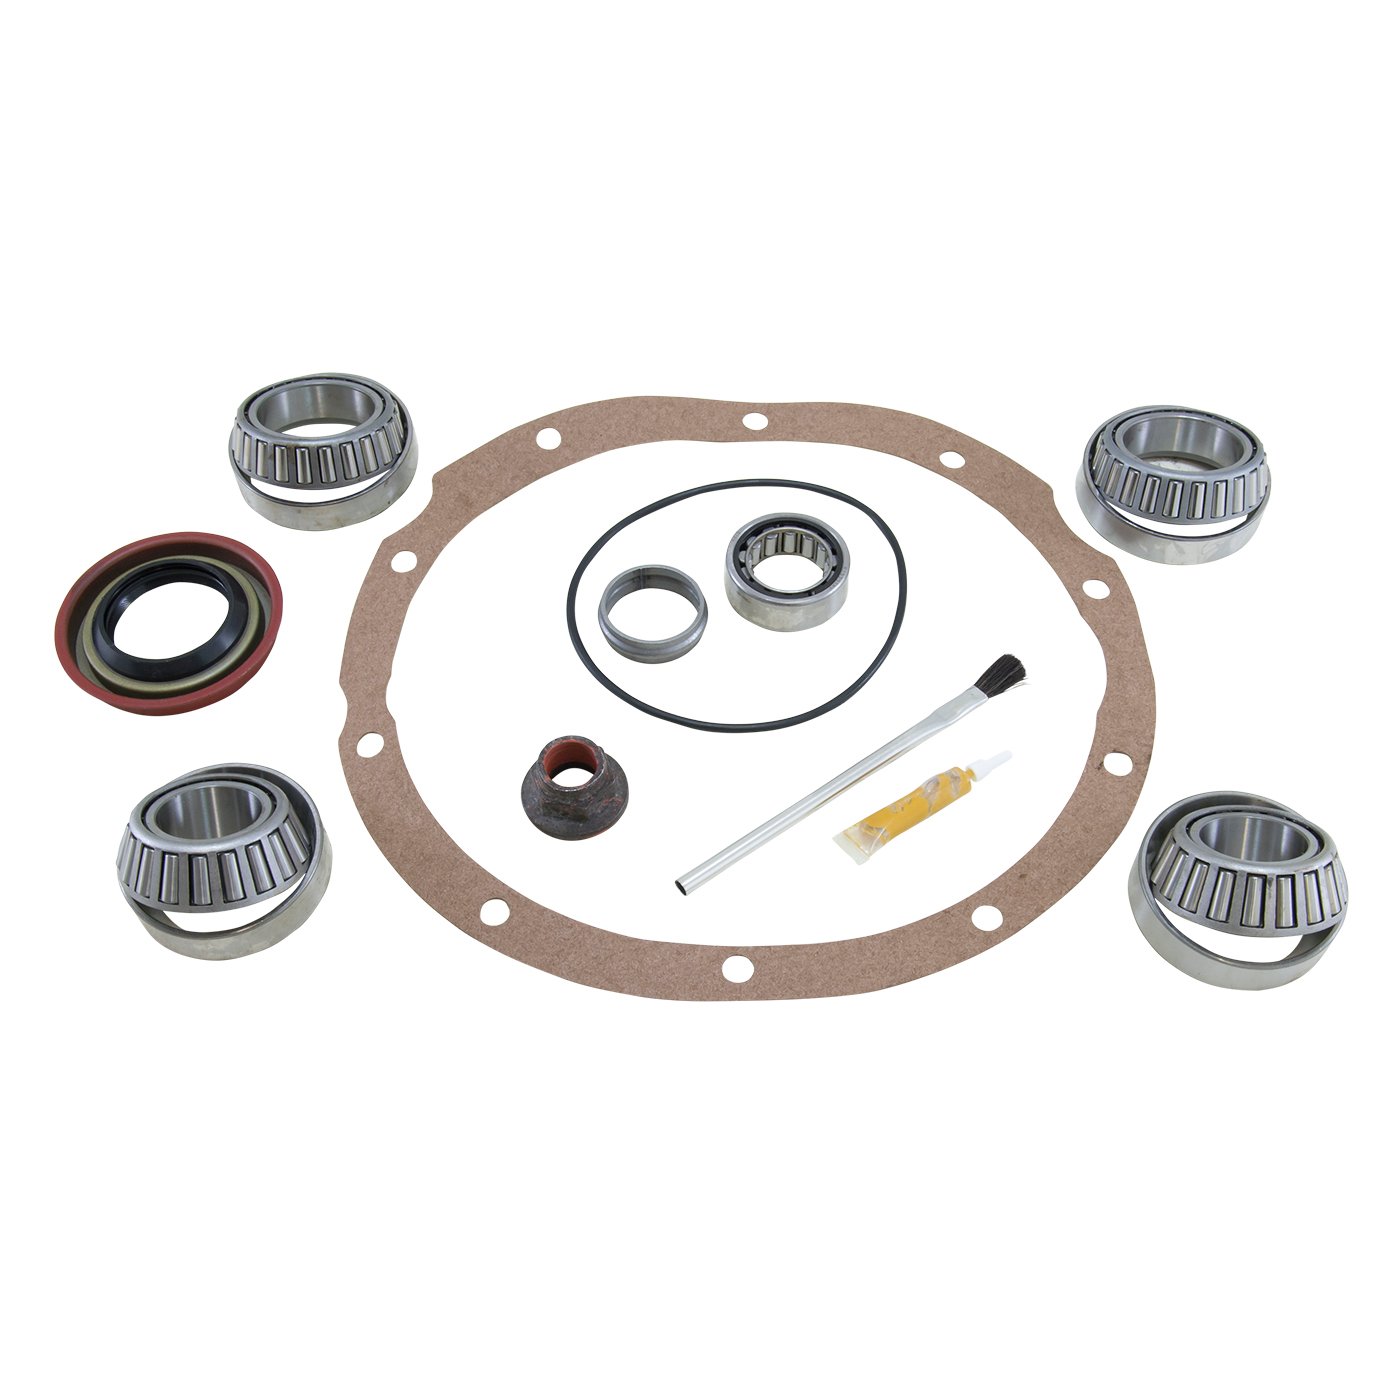 Bearing Install Kit For Ford Daytona 9 in. Differential, Lm104911 Bearings